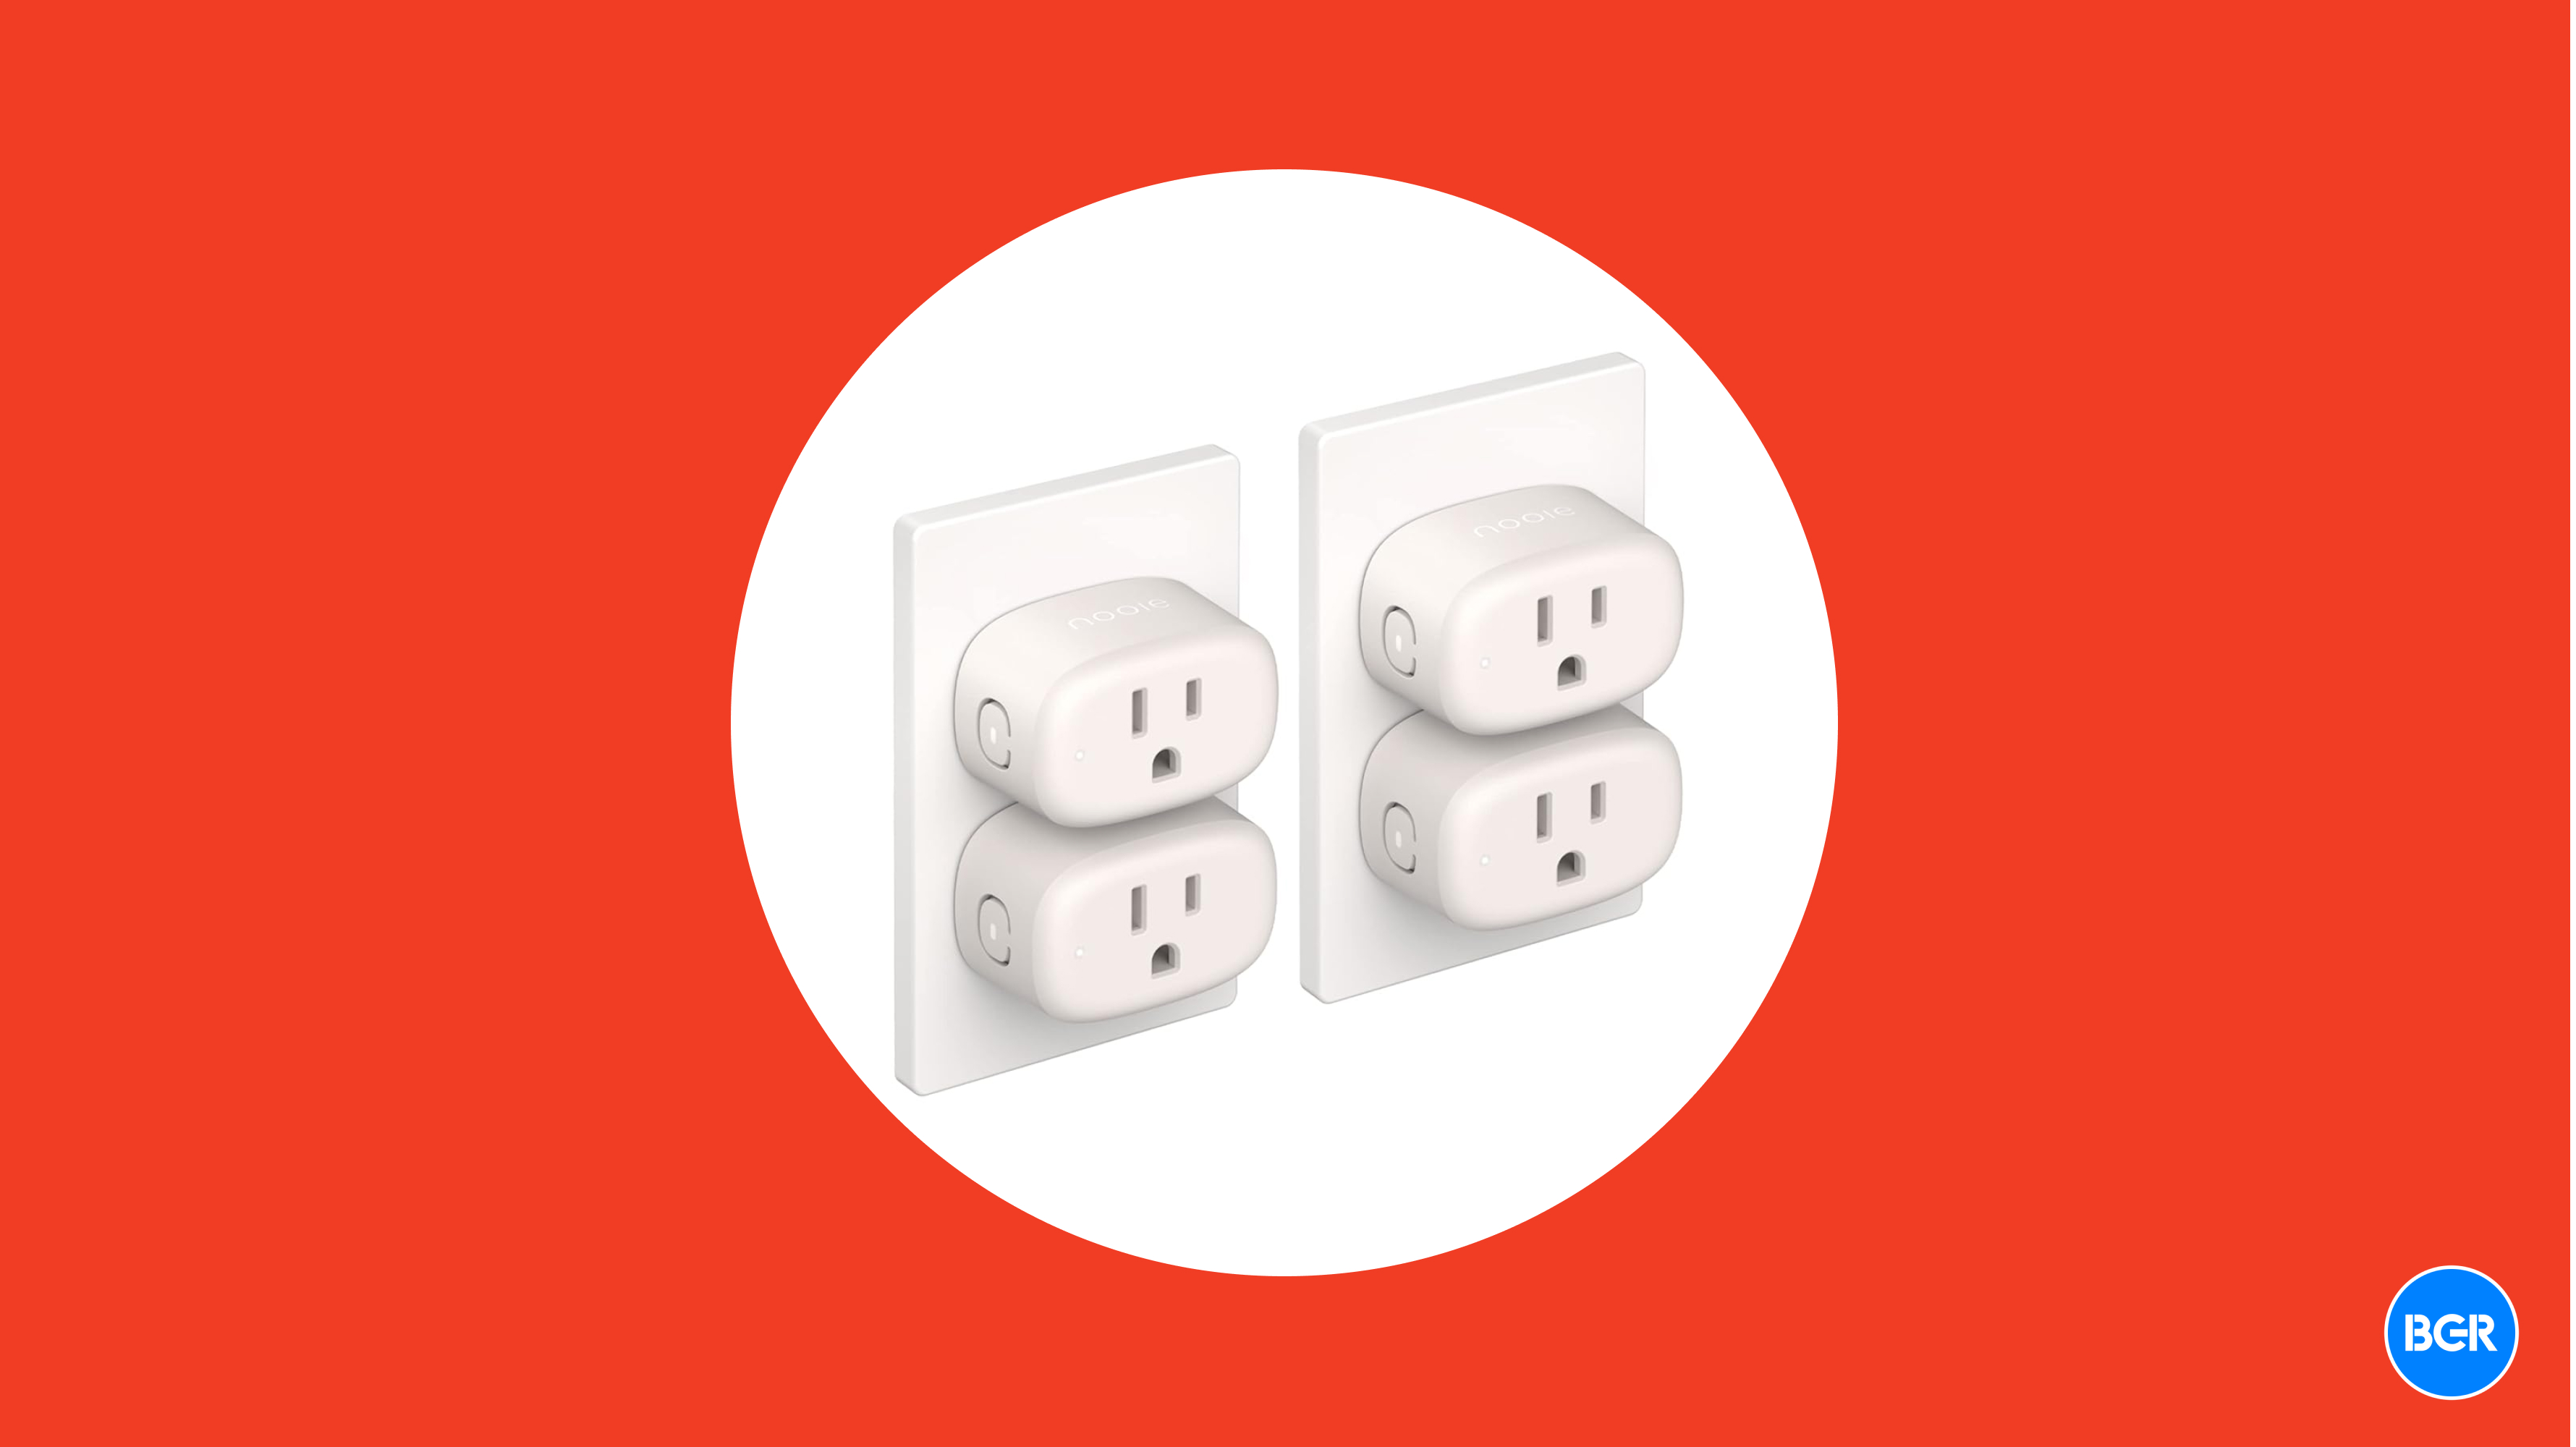 Avatar Controls Smart Plugs Wi-Fi Outlet 4 Pack - Smart Plugs That Work  with Alexa/Google Home/Smart Life, Timer ON/Off Plug, Schedule Built-in  App